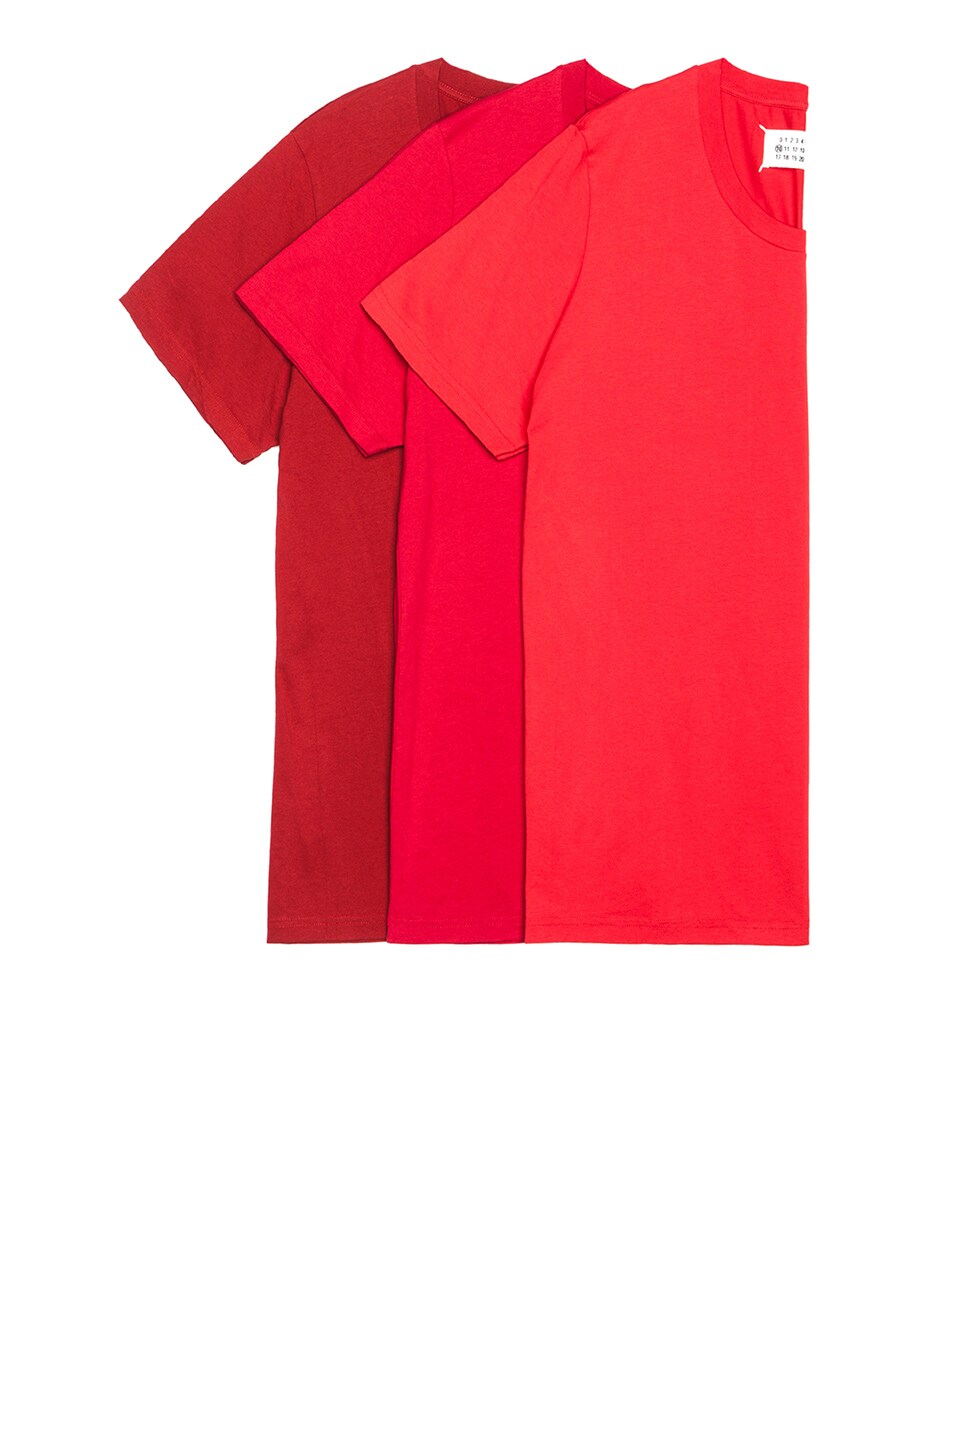 Image 1 of Maison Margiela Cotton Jersey Tee Set in Reds